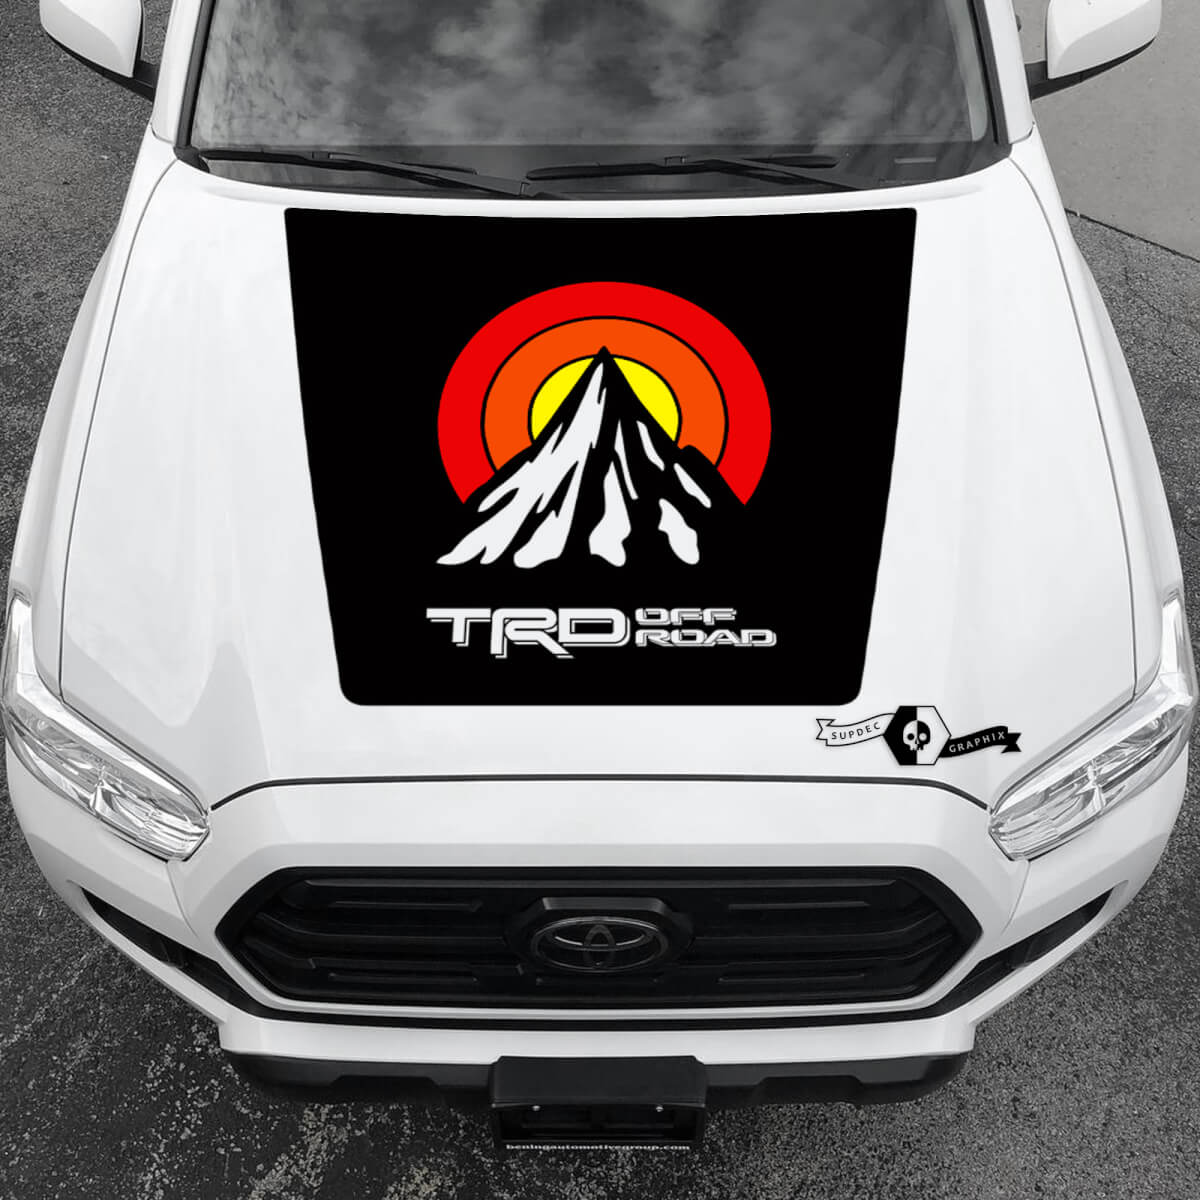 Tacoma TRD Sunrise Vintage TOYOTA Off Road Mountains Peak Summit Hood Decals Stickers for Tacoma Tundra 4Runner Hilux